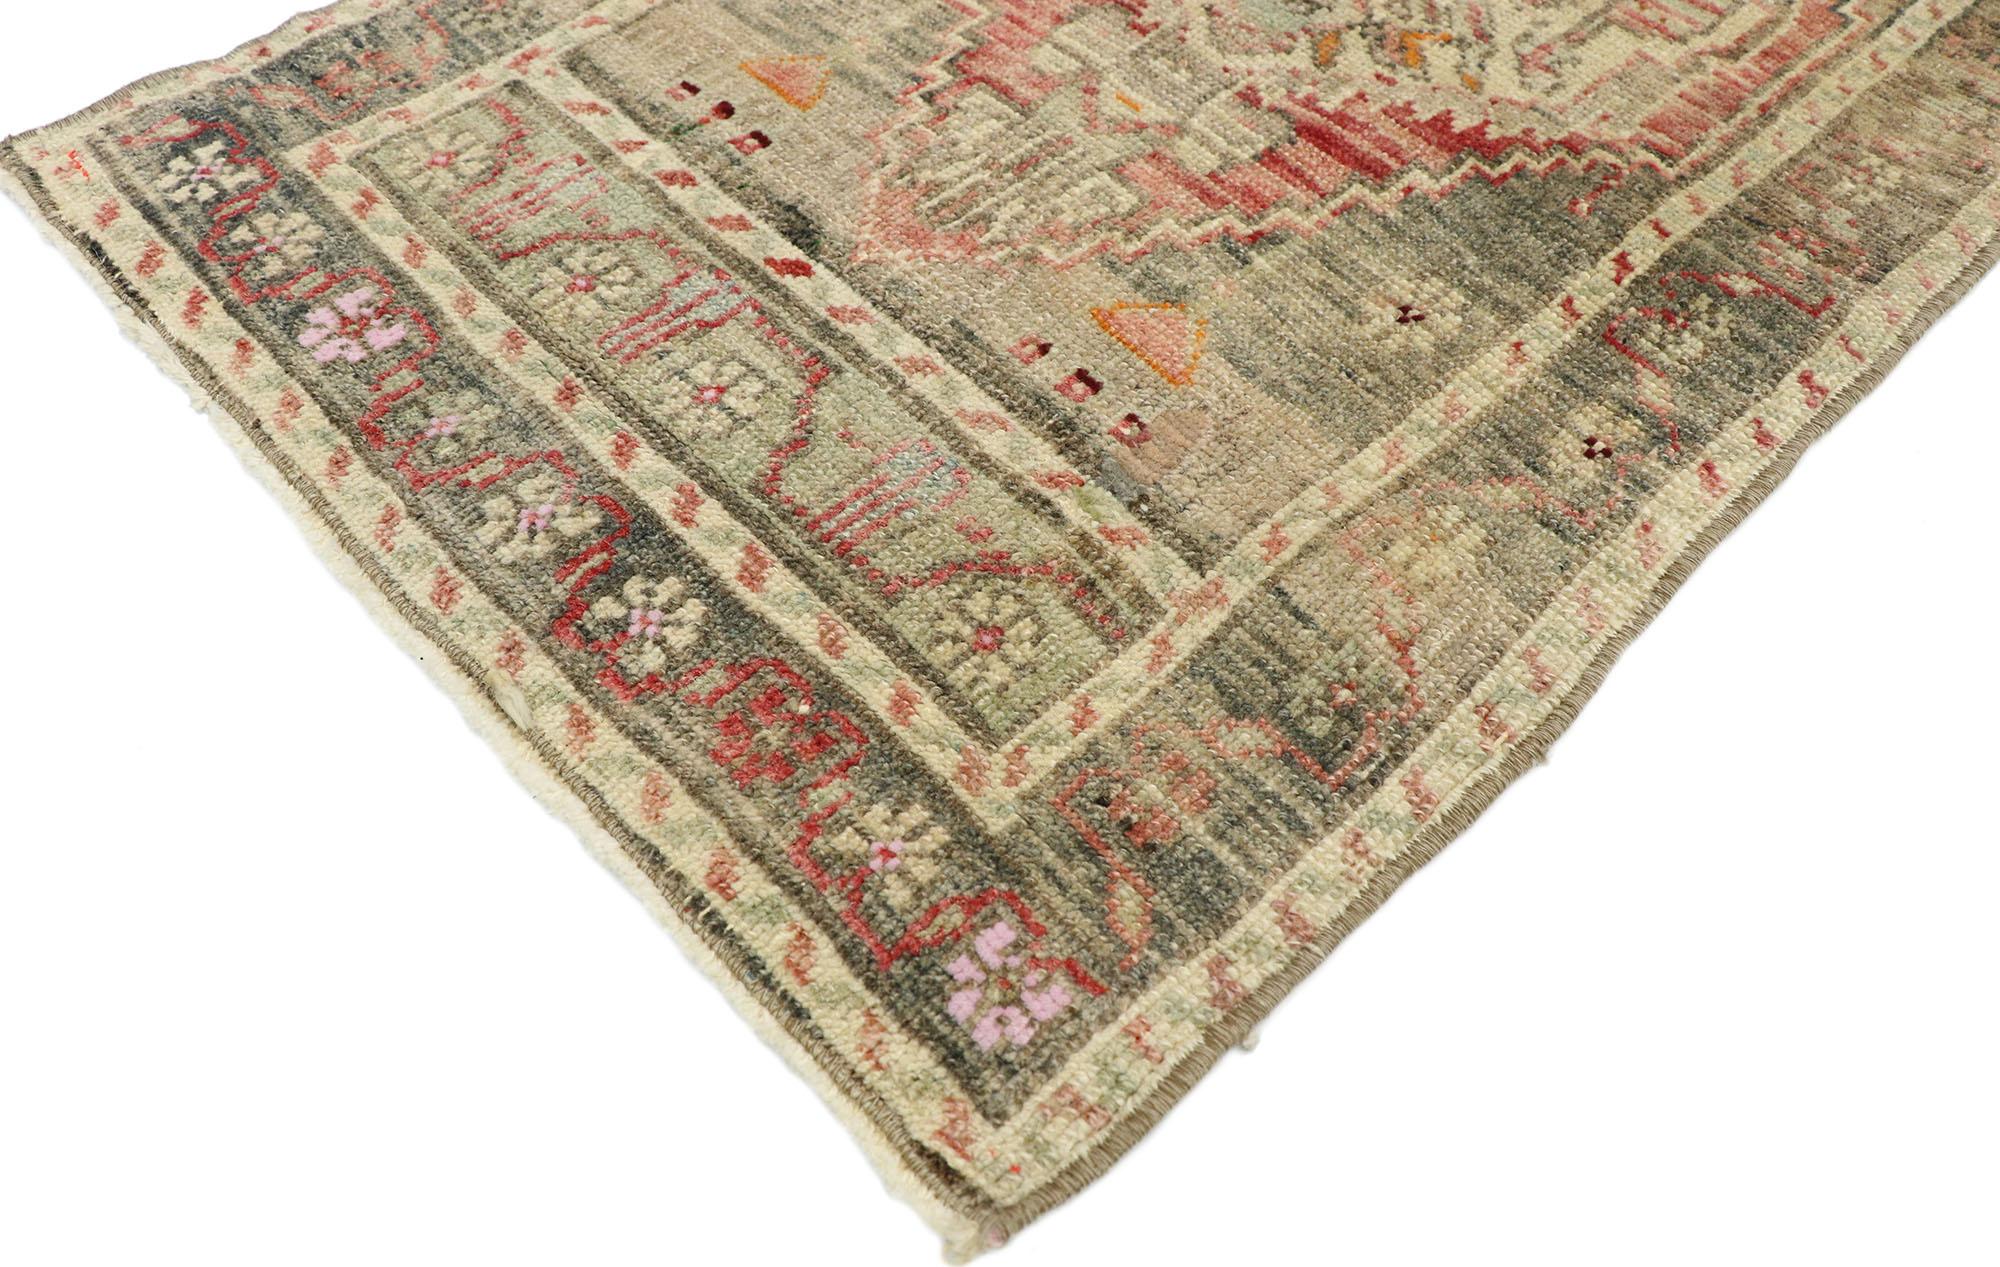 52722, vintage Turkish Oushak Yastik rug with rustic industrial style, Scatter rug. Immersed in Anatolian history and refined colors, this hand knotted wool vintage Oushak Yastik rug combines simplicity with sophistication. It features a stepped